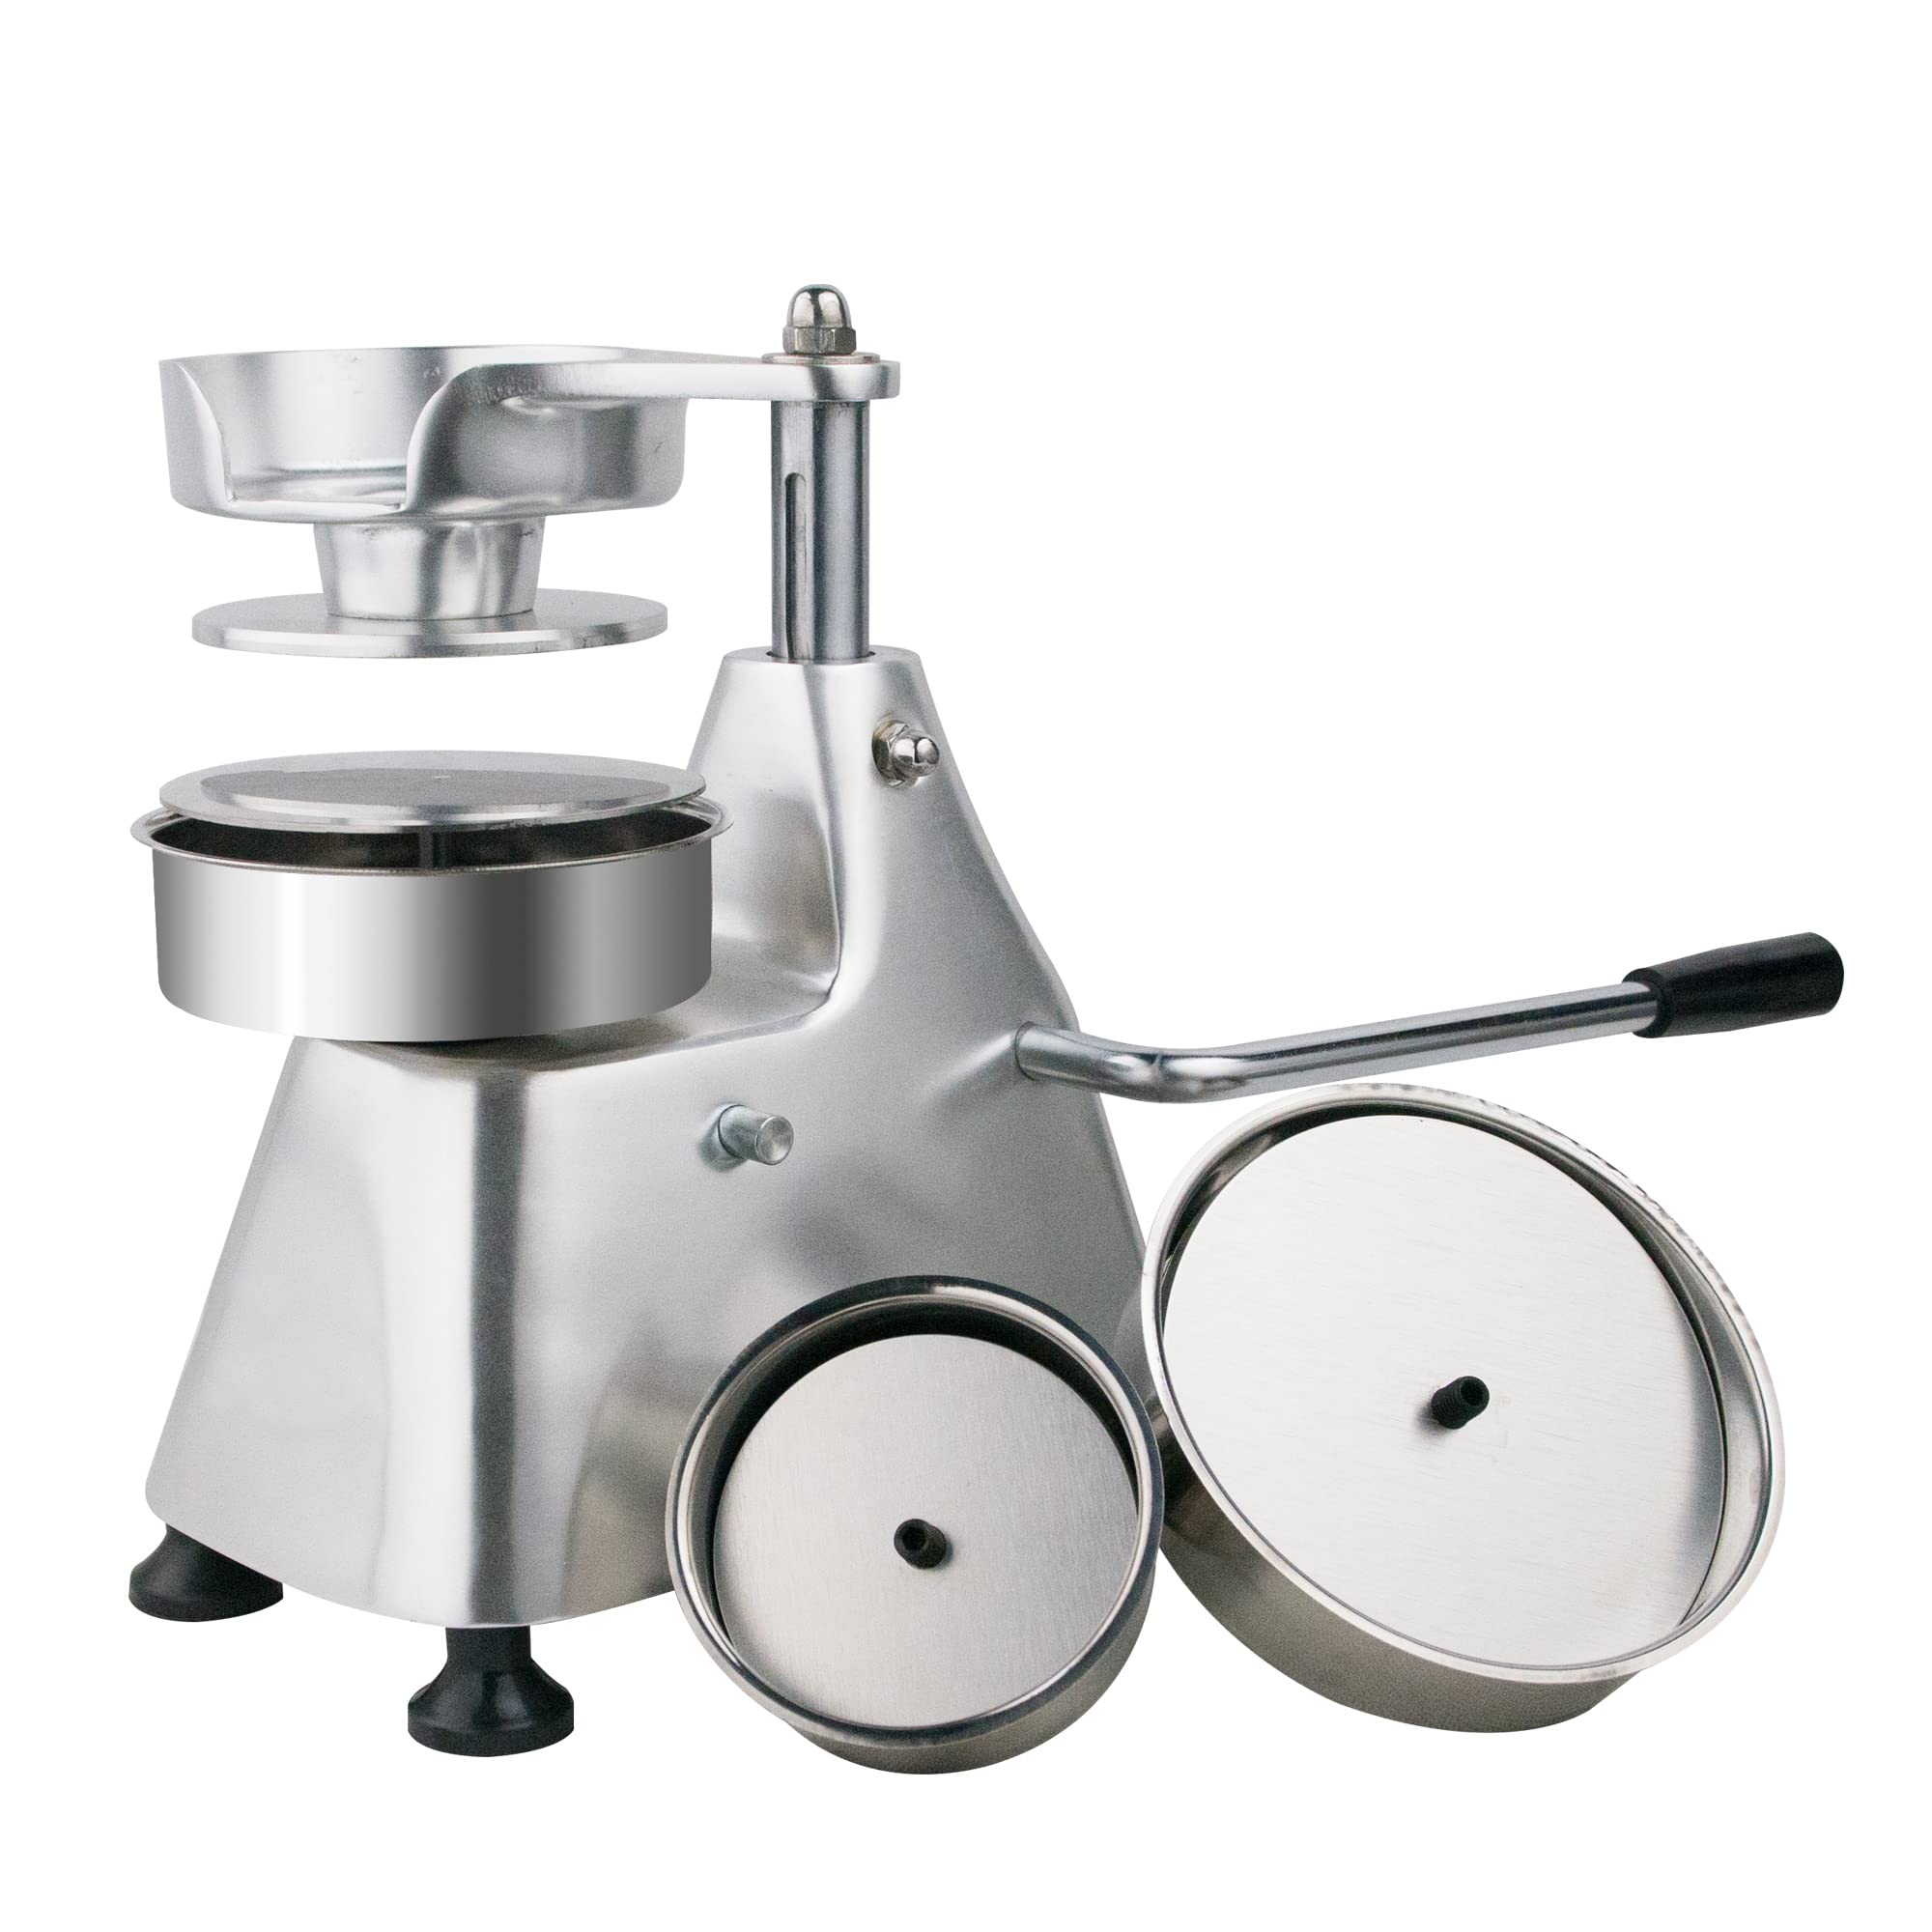 (Official Refurbishment)Hakka Commercial Burger Press 3 in 1 Heavy Duty Hamburger Press, Hamburger Patty Maker, with Three Size Trays 4"/5"/6", Includes 1500 Pcs Patty Papers